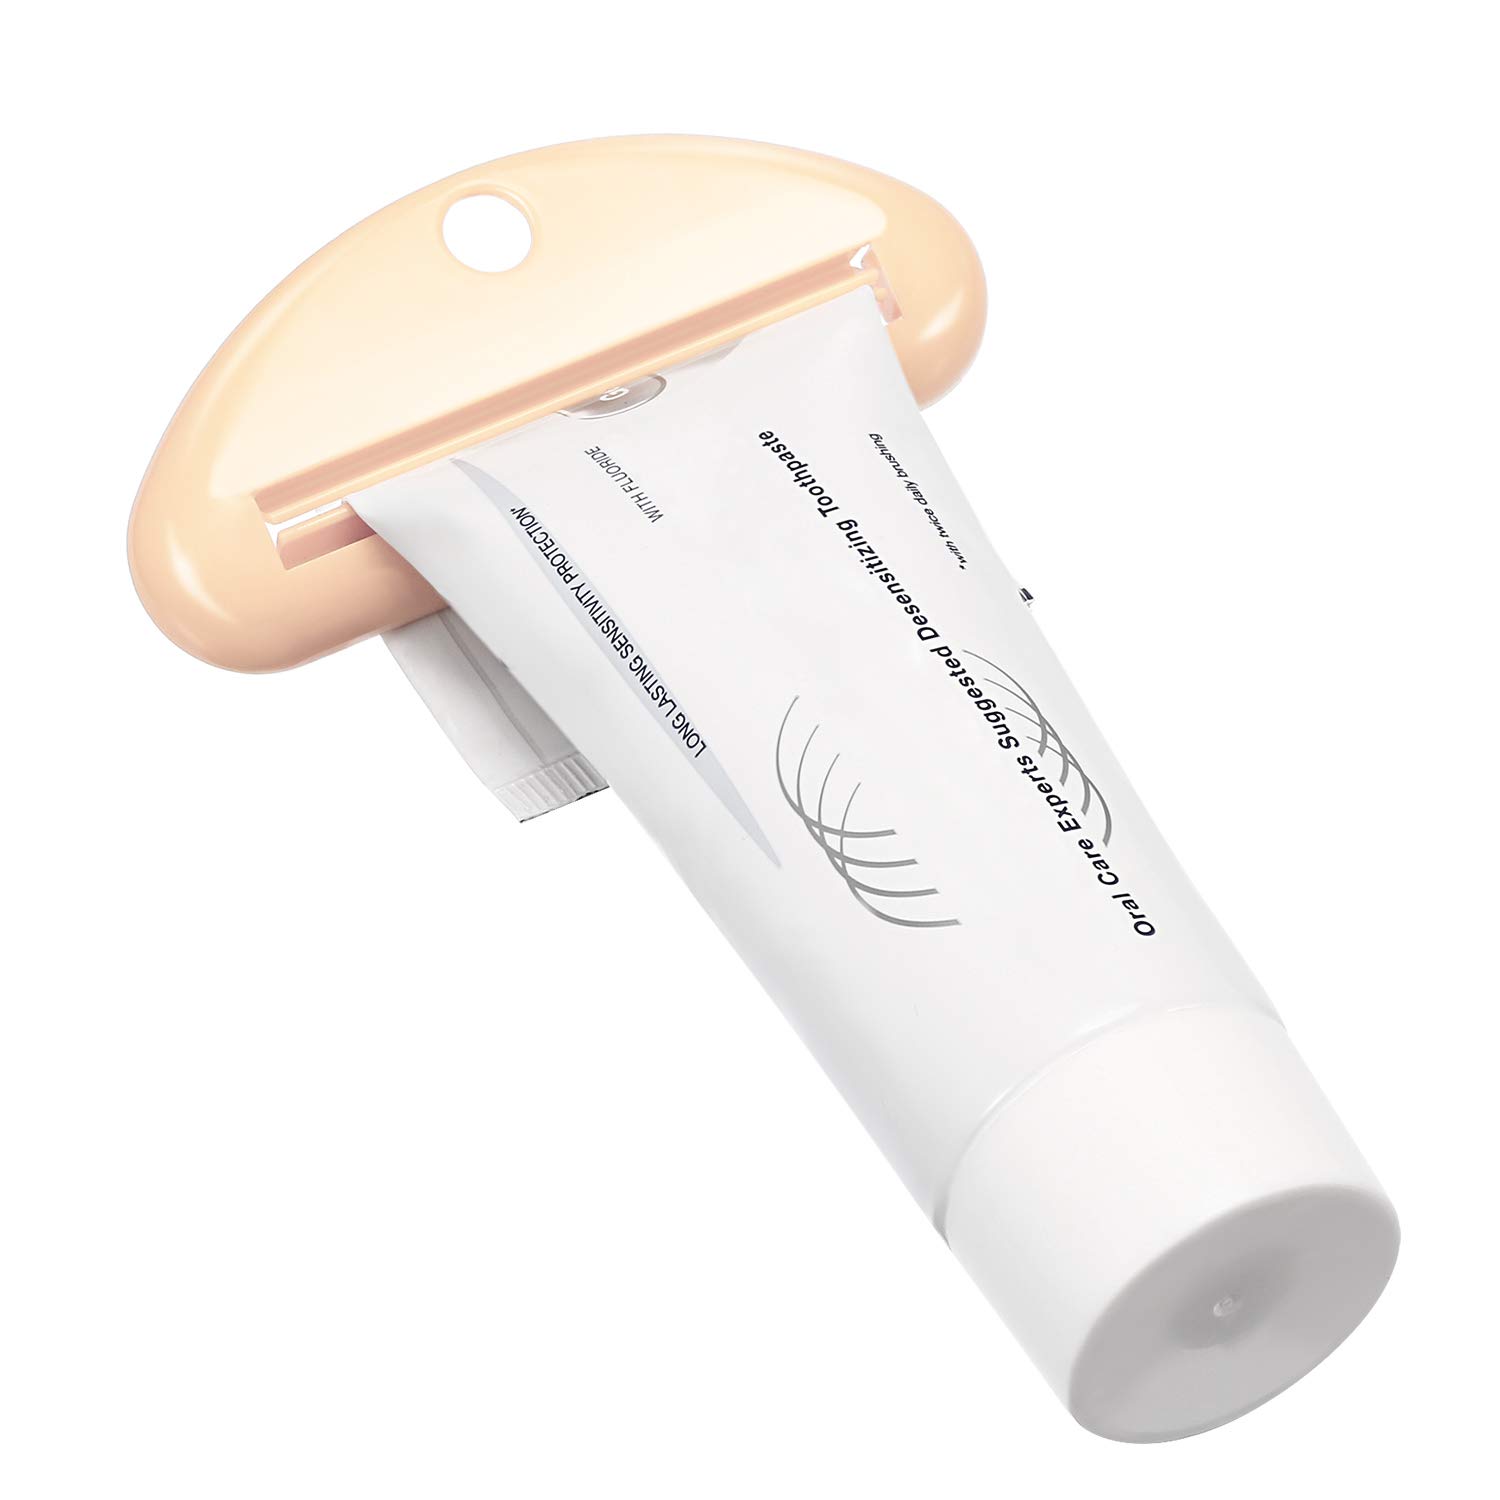 MOTHER'S DAY SALE-80% OFF🔥Facial Cleanser/Toothpaste Tube Squeezer-BUY 5 GET 5 FREE(10 PCS)